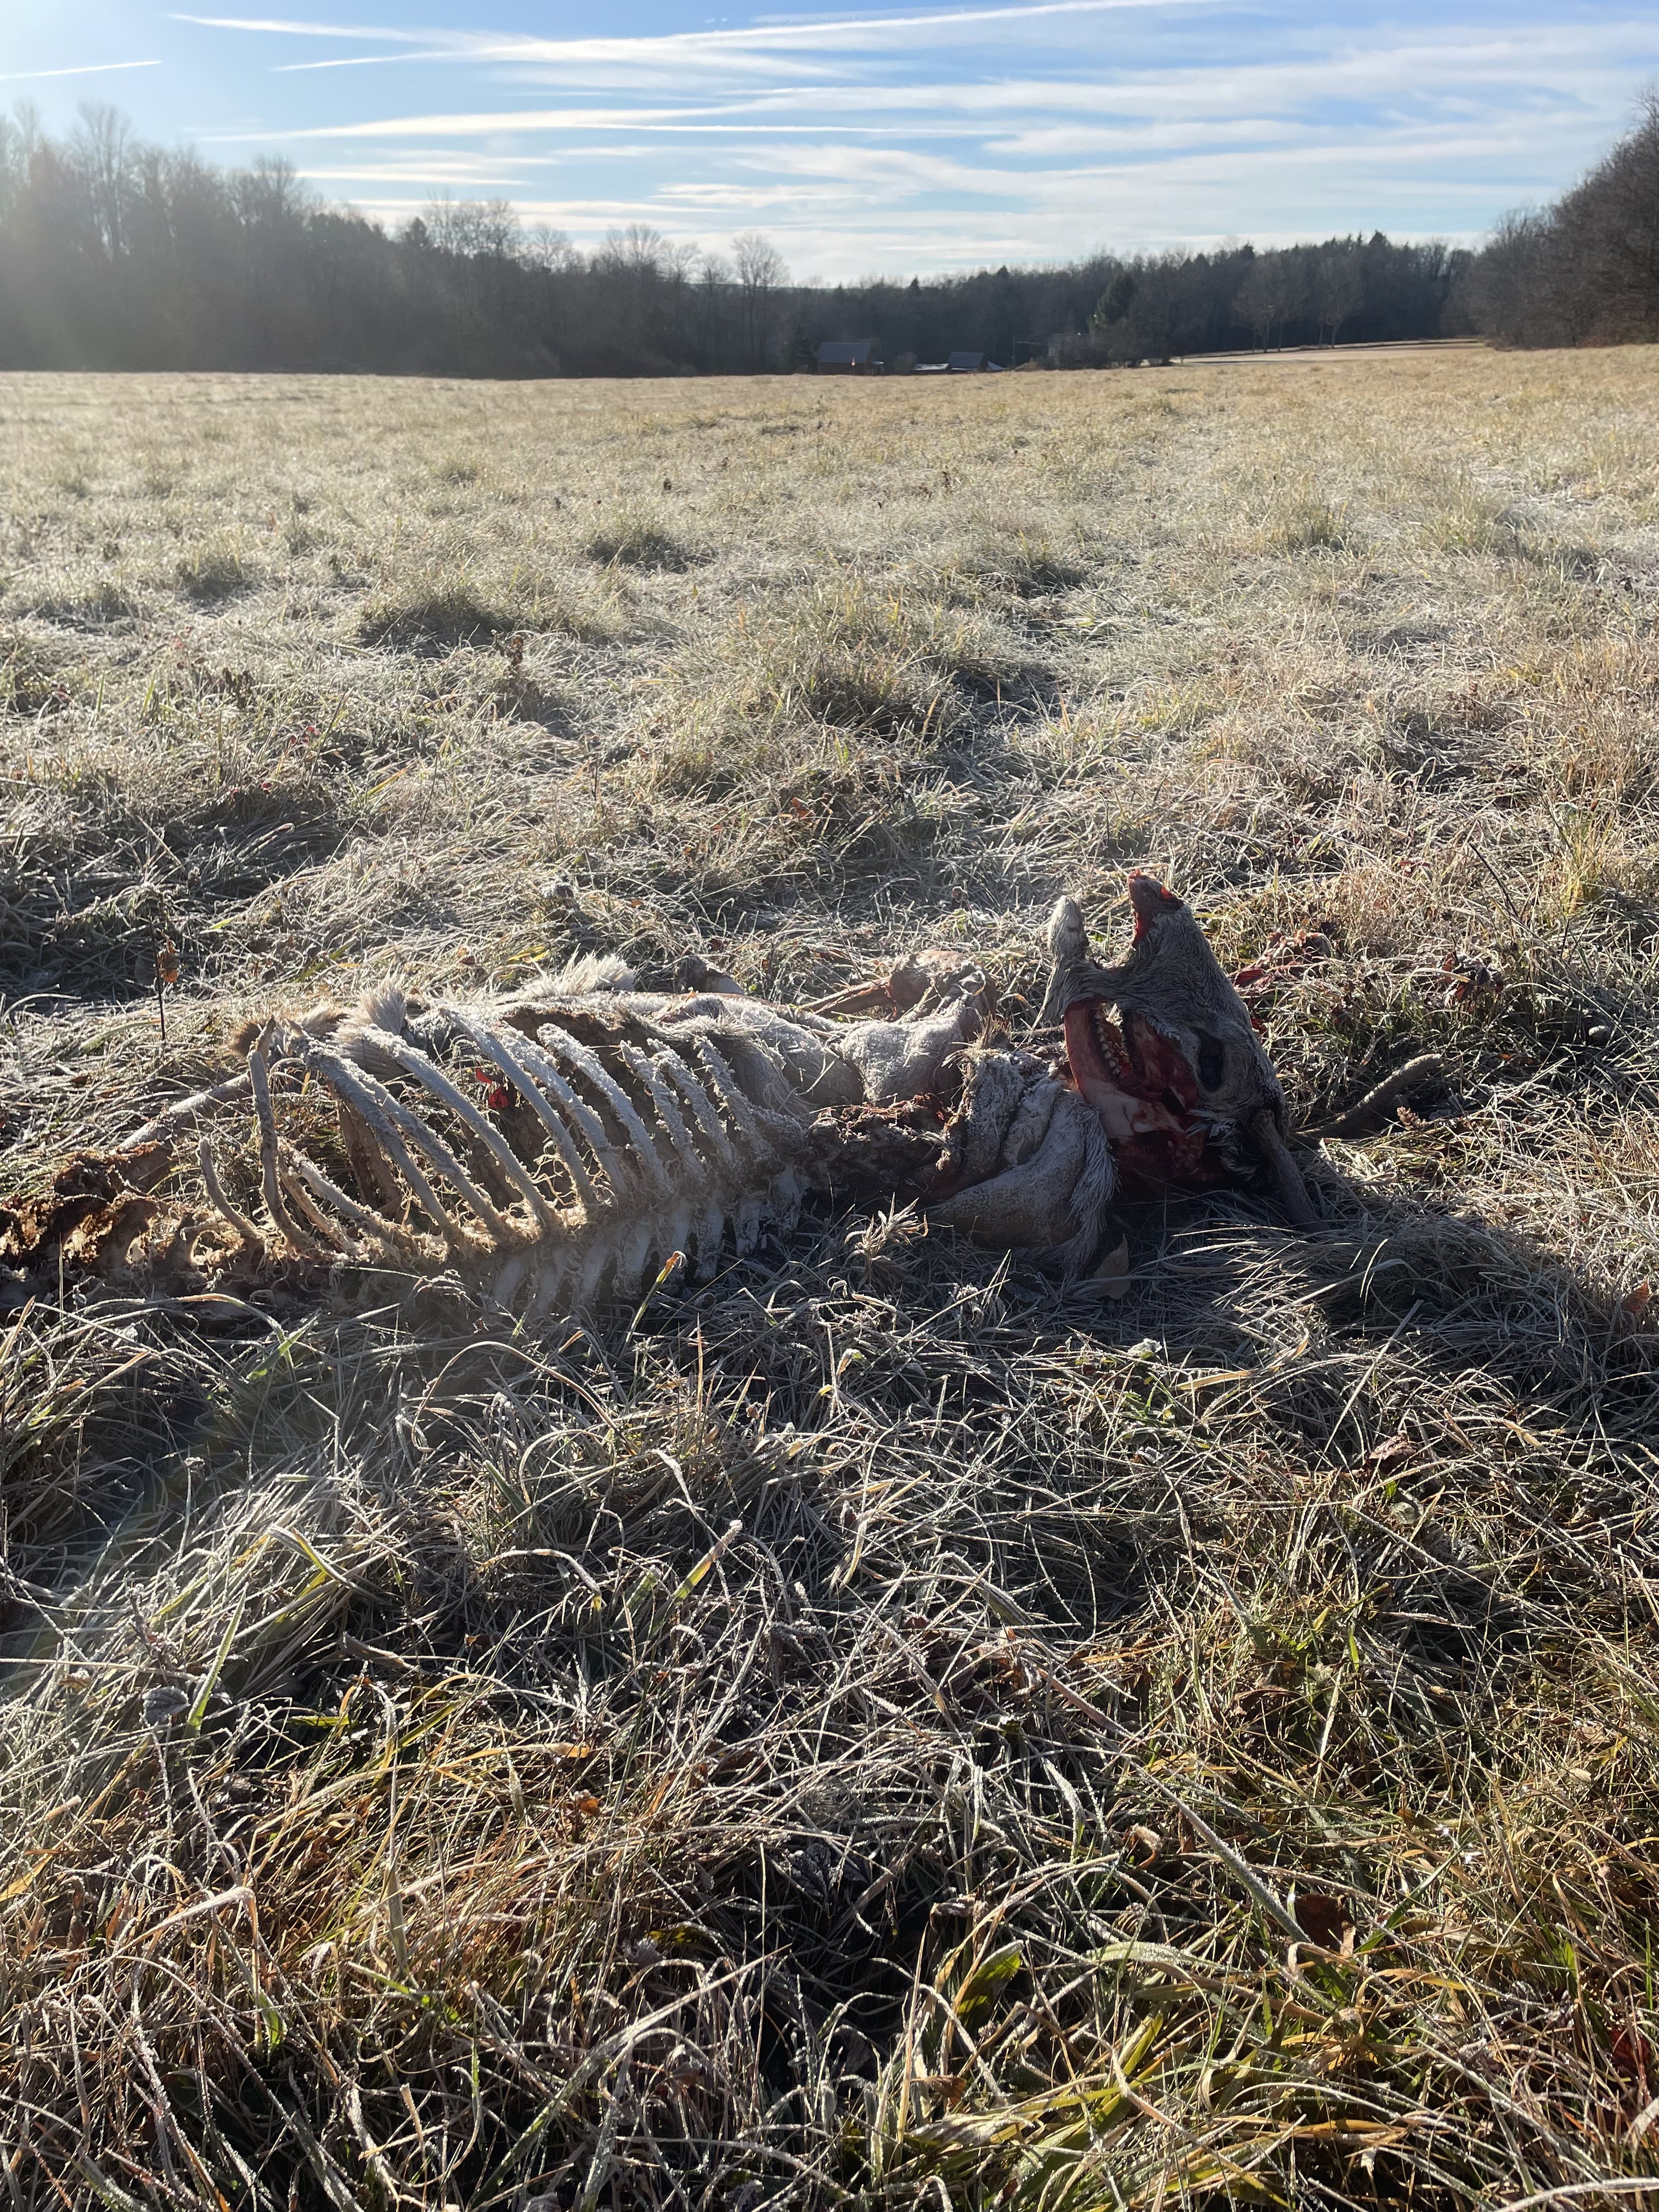 Carcass of buck in field with ribs showing